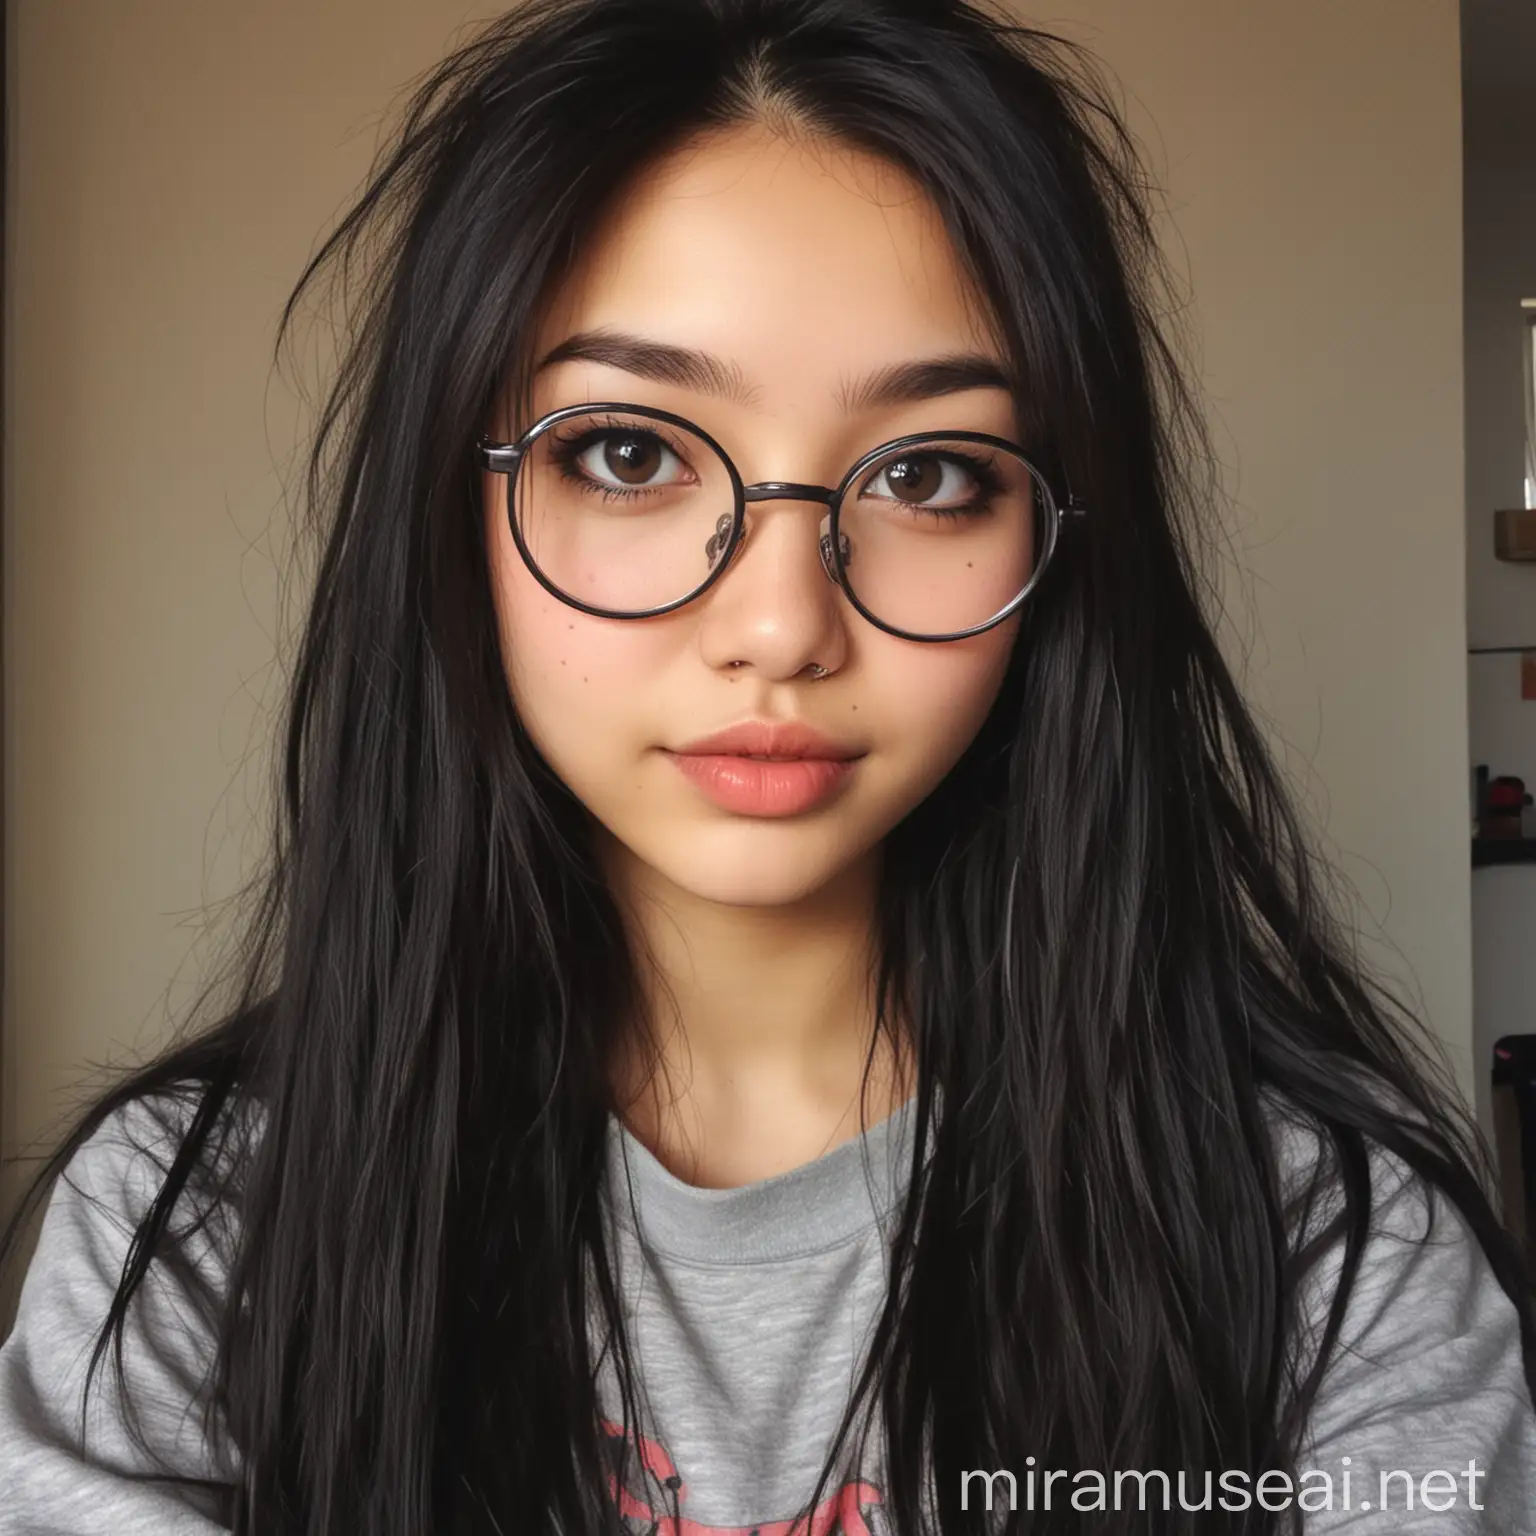 Confident Cool Girl with Messy Black Hair and Glasses